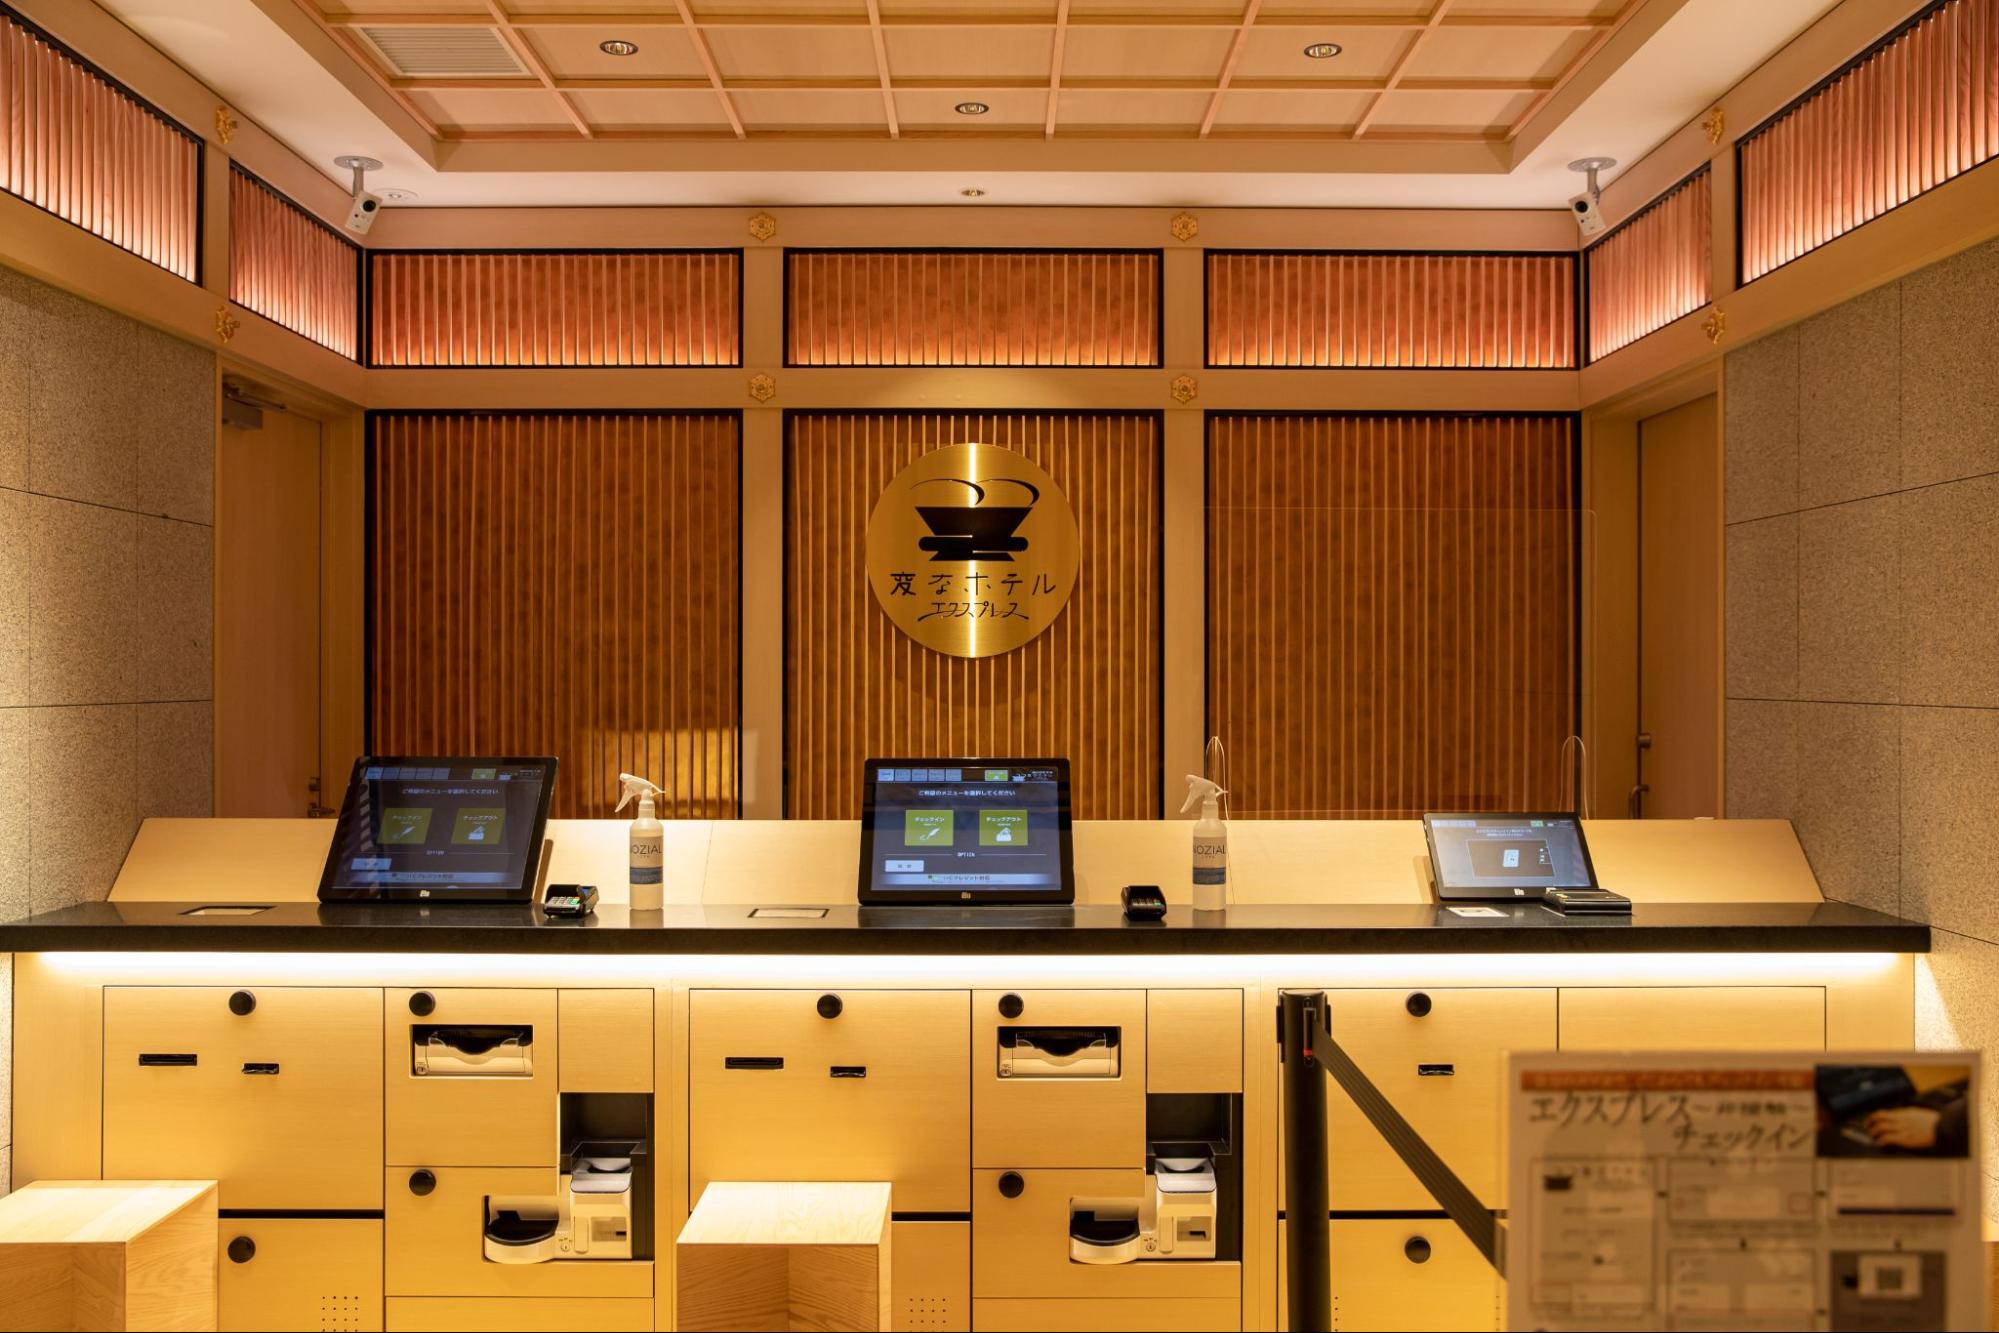 Henn na Hotel Express: Hotel in Nagoya where you can Check In in 10 Seconds!